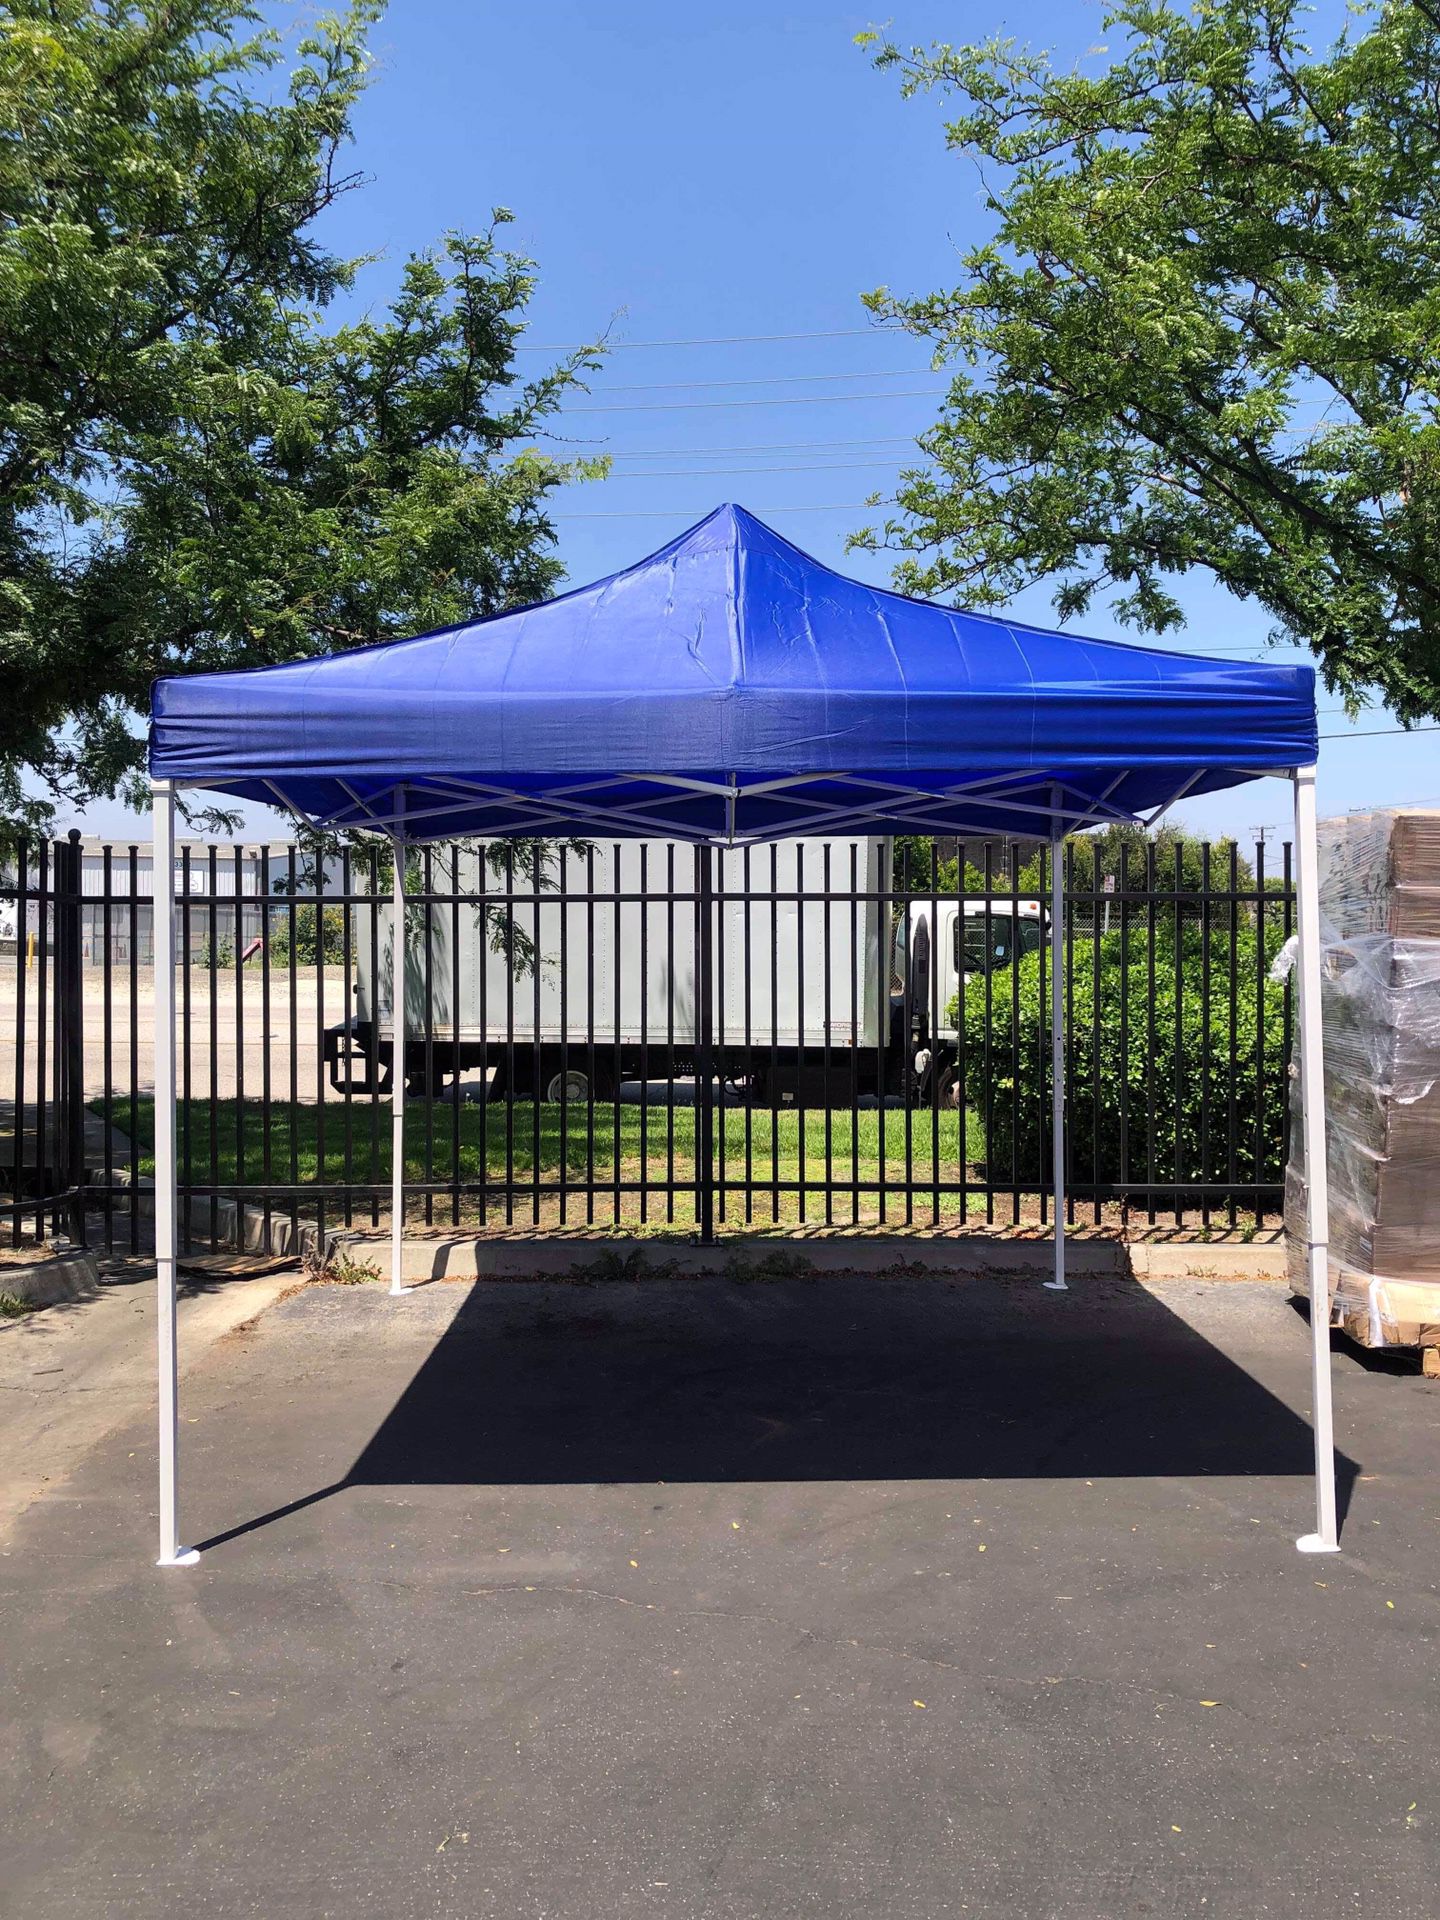 🌦🌦🌦10x10ft Pop Up Canopy Tent Available in Different colors🌦🌦🌦